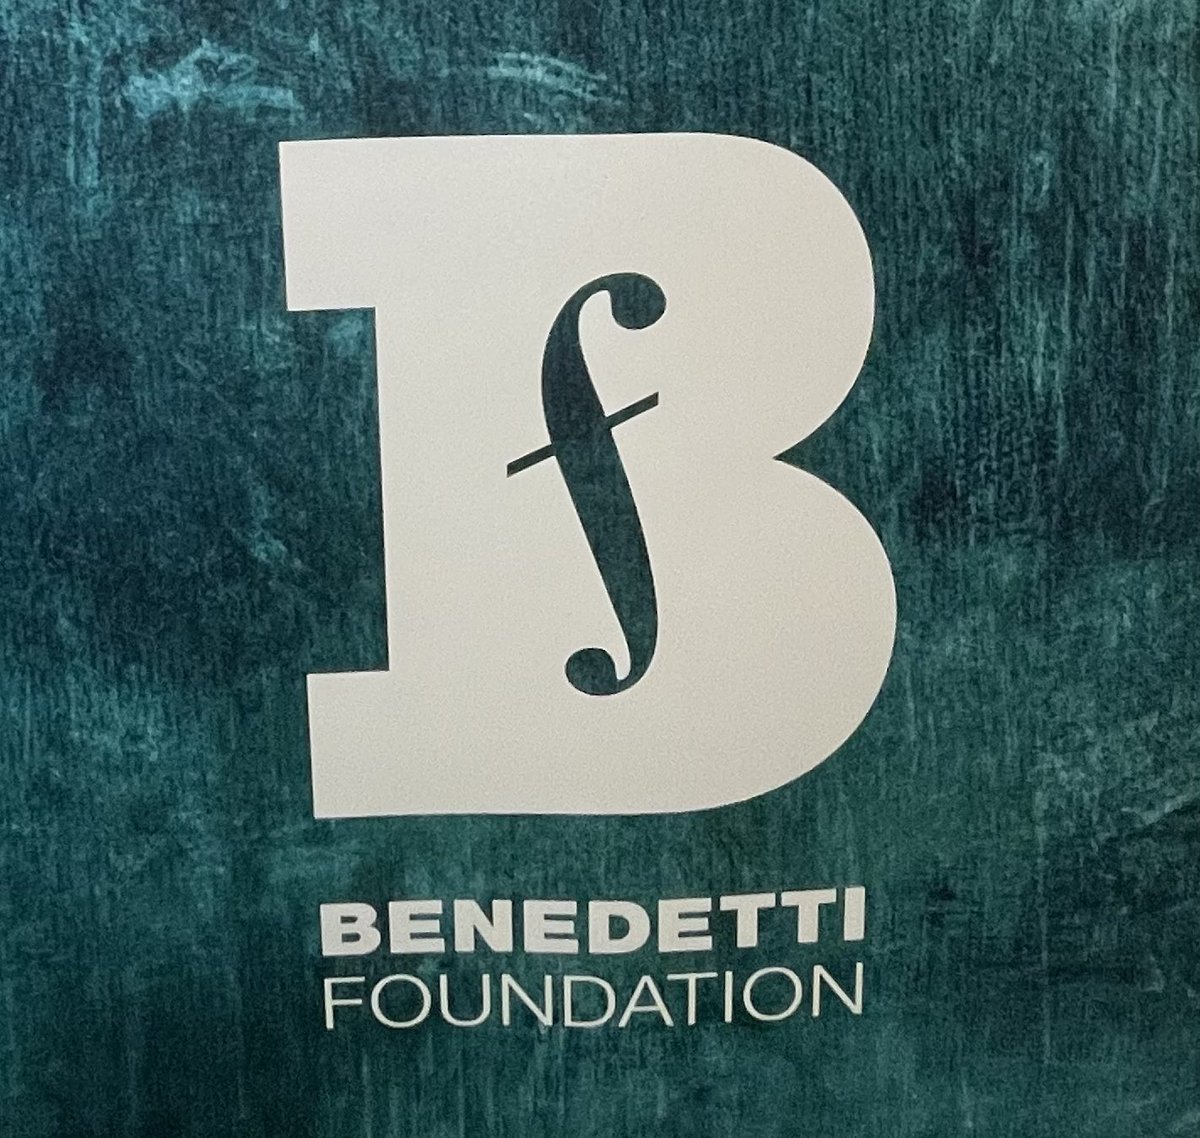 Early start in Aberdeen volunteering in support of the amazing @benedetti_fdtn. Toi toi toi!